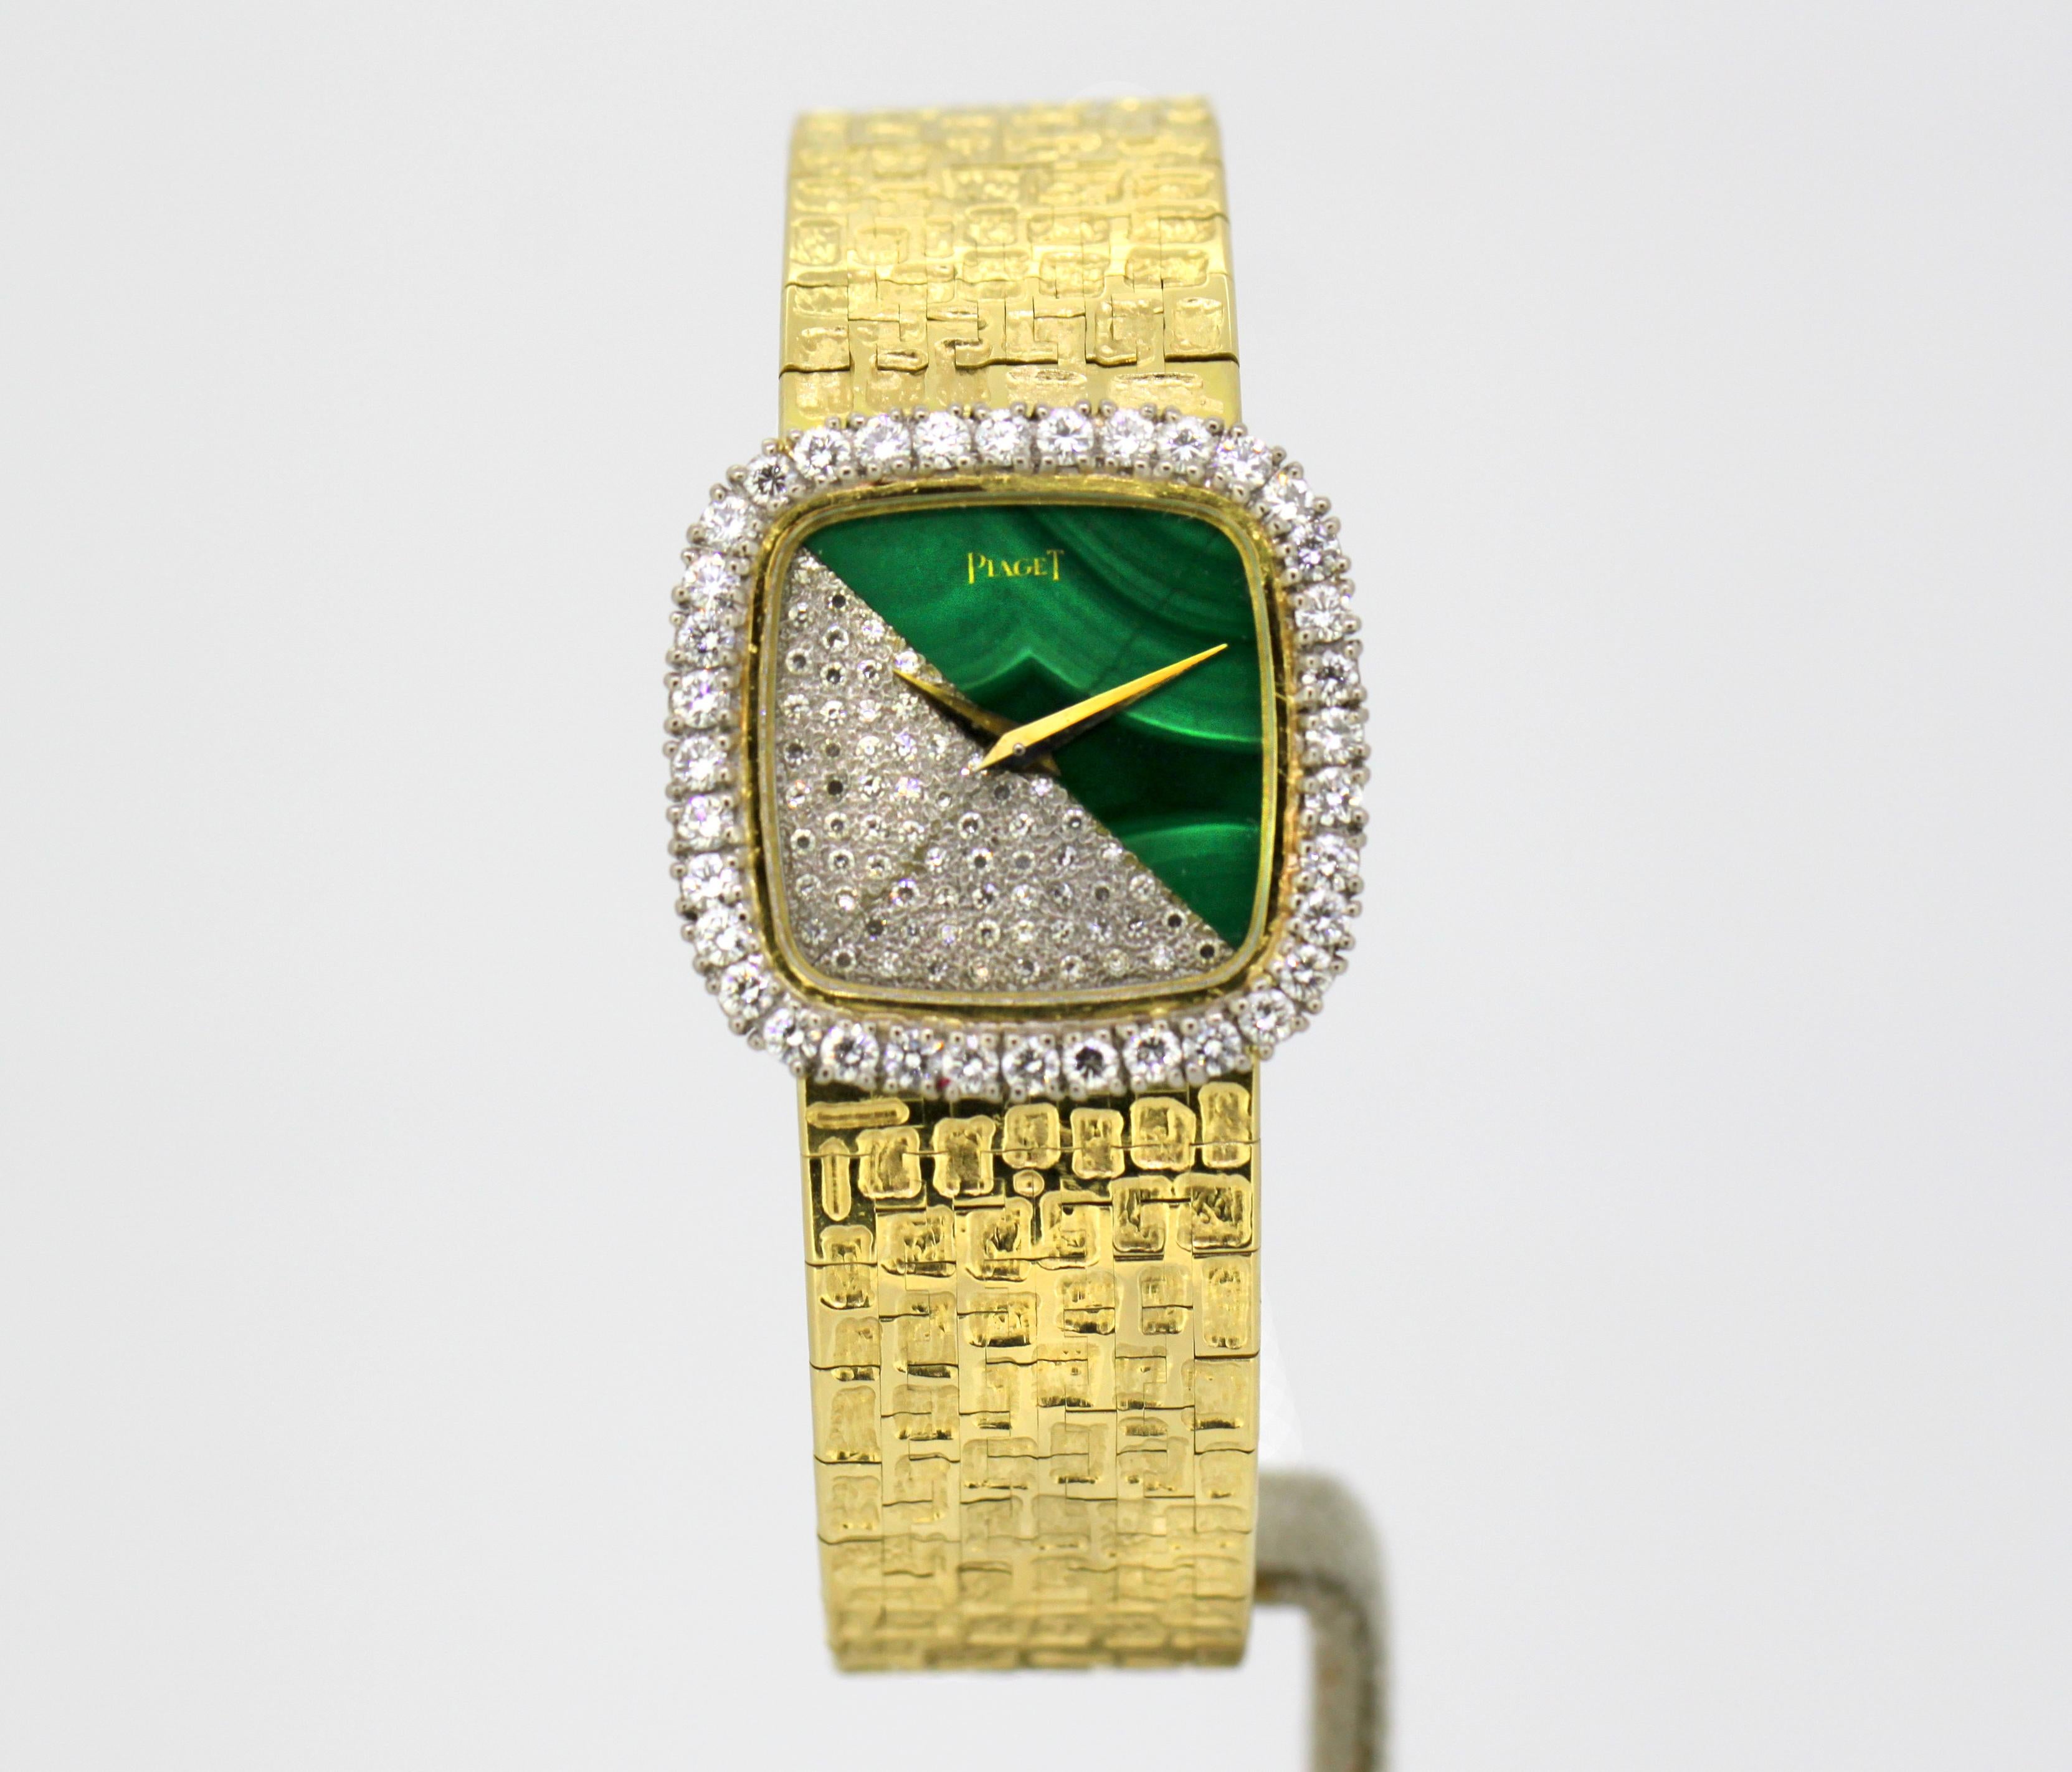 Piaget, Ladies 18K gold, diamond and malachite manual wind bracelet watch.

Gender: Ladies
Movement: 18-jewel Cal.9P1 manual wind, adjusted to 5 positions and temperature
Case Diameter : 26 mm
Movement: Manual Wining
Watchband Material: 18k